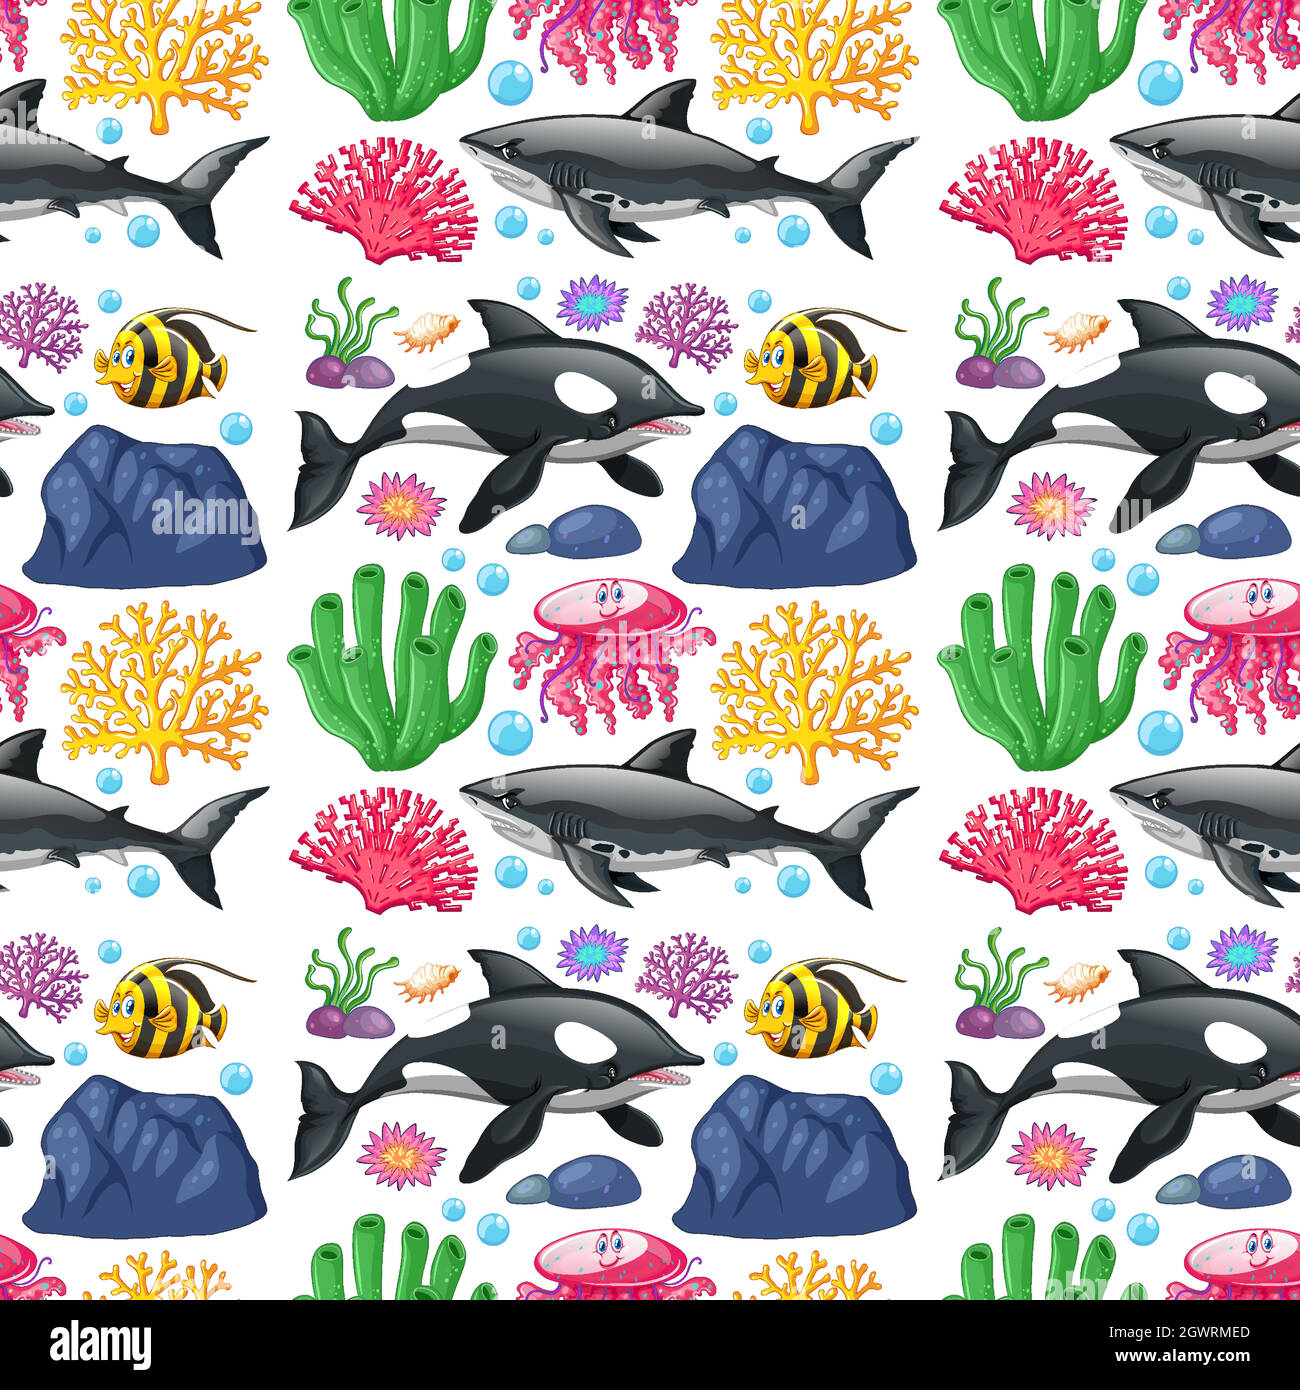 Seamless background design with sea creatures Stock Vector